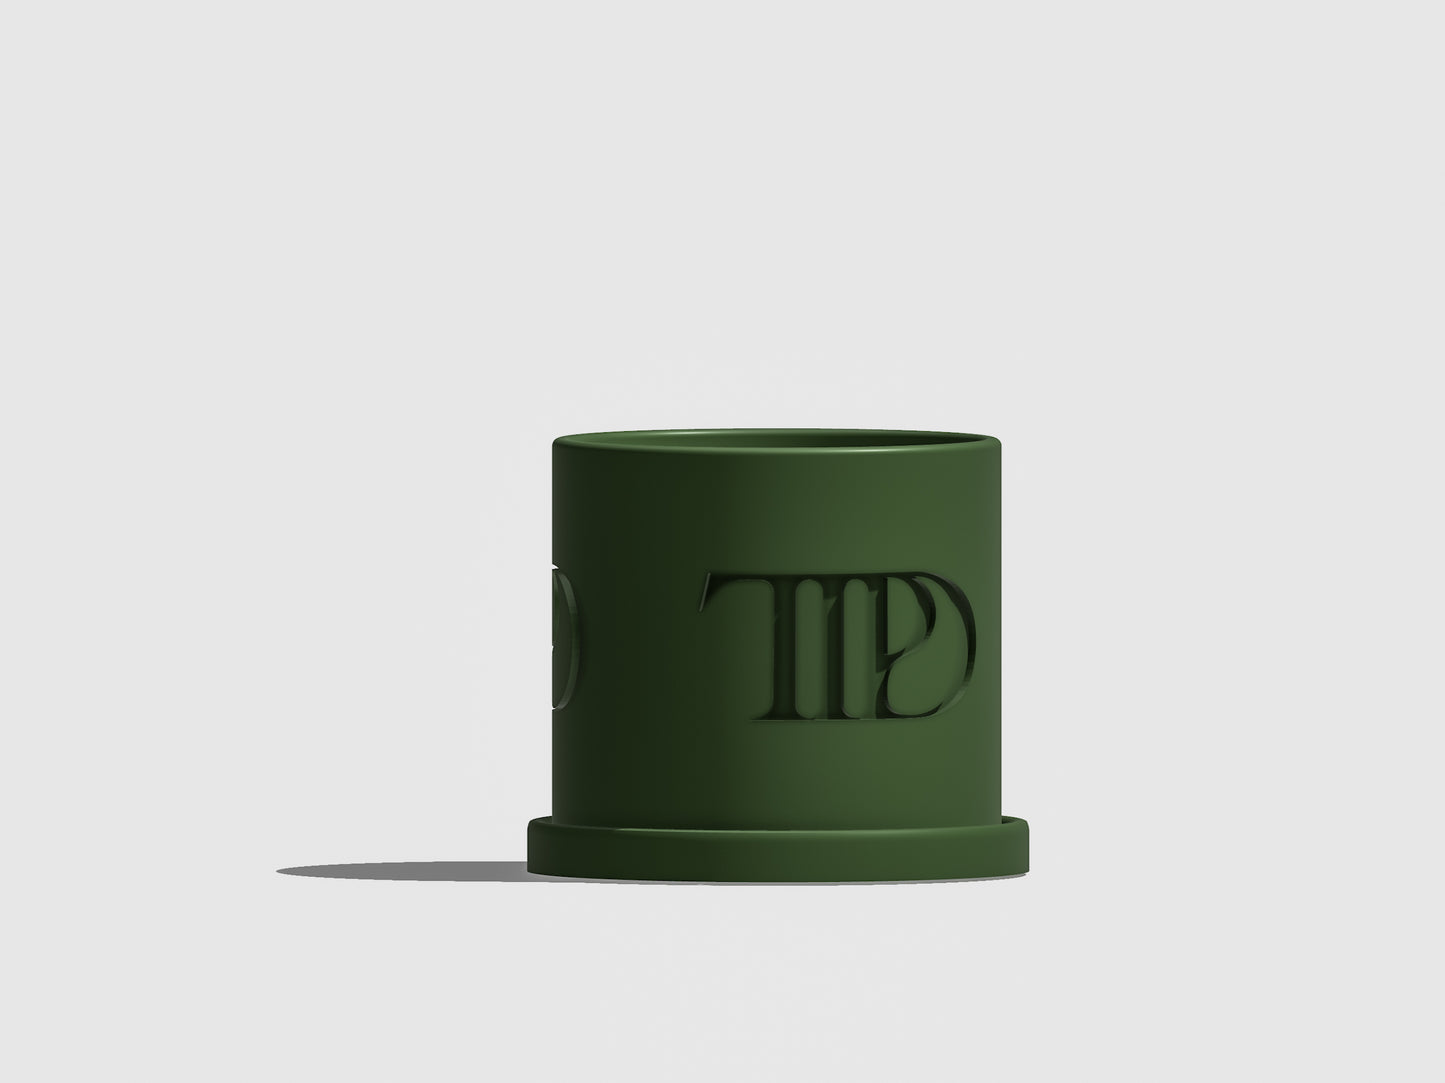 TS Plant Pot With Drainage, TTPD Merch Decor, 3D Printed Planter, Gifts for Swifties, Tortured Poets Department Home Decor